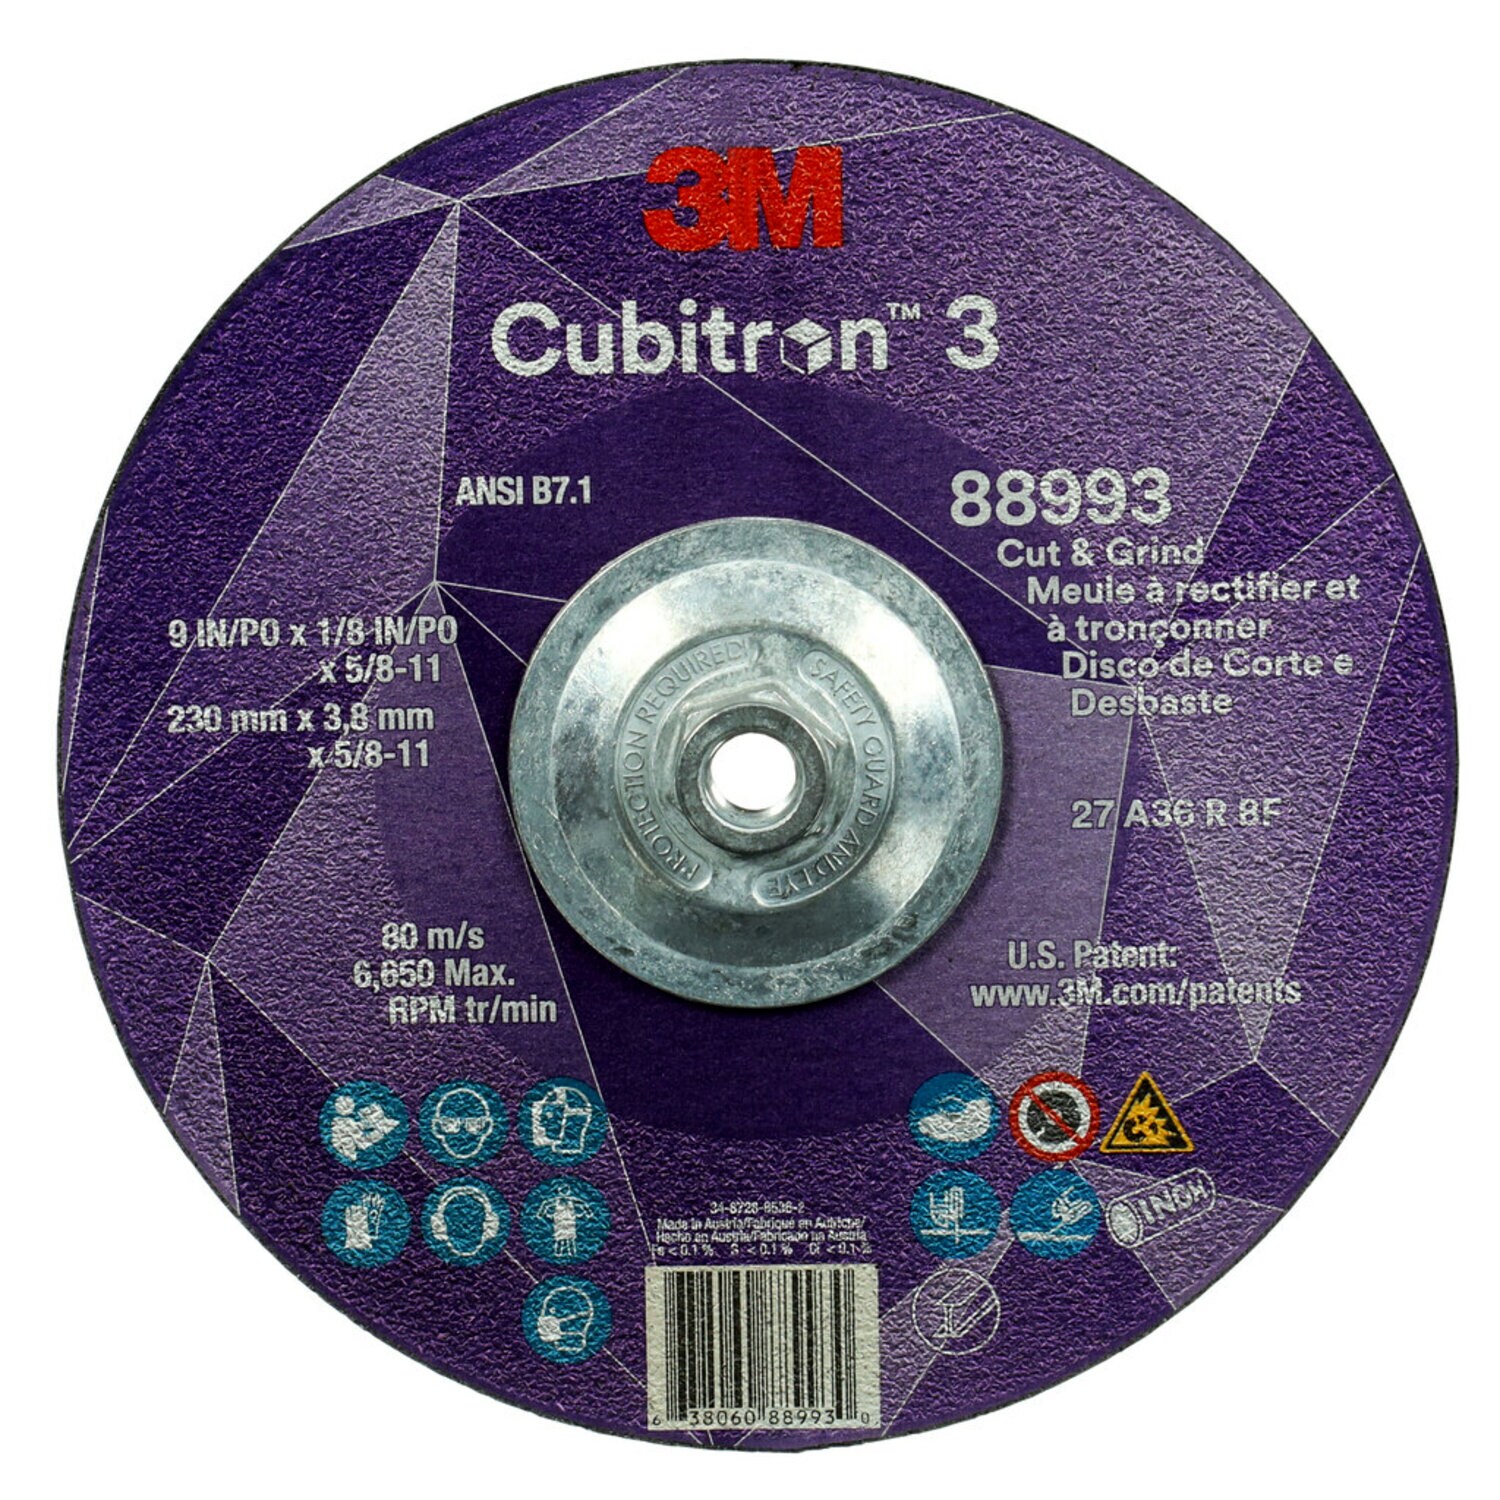 7100313197 - 3M Cubitron 3 Cut and Grind Wheel, 88993, 36+, T27, 9 in x 1/8 in x
5/8 in-11 (230 x 3.2 mm x 5/8-11 in), ANSI, 10 ea/Case